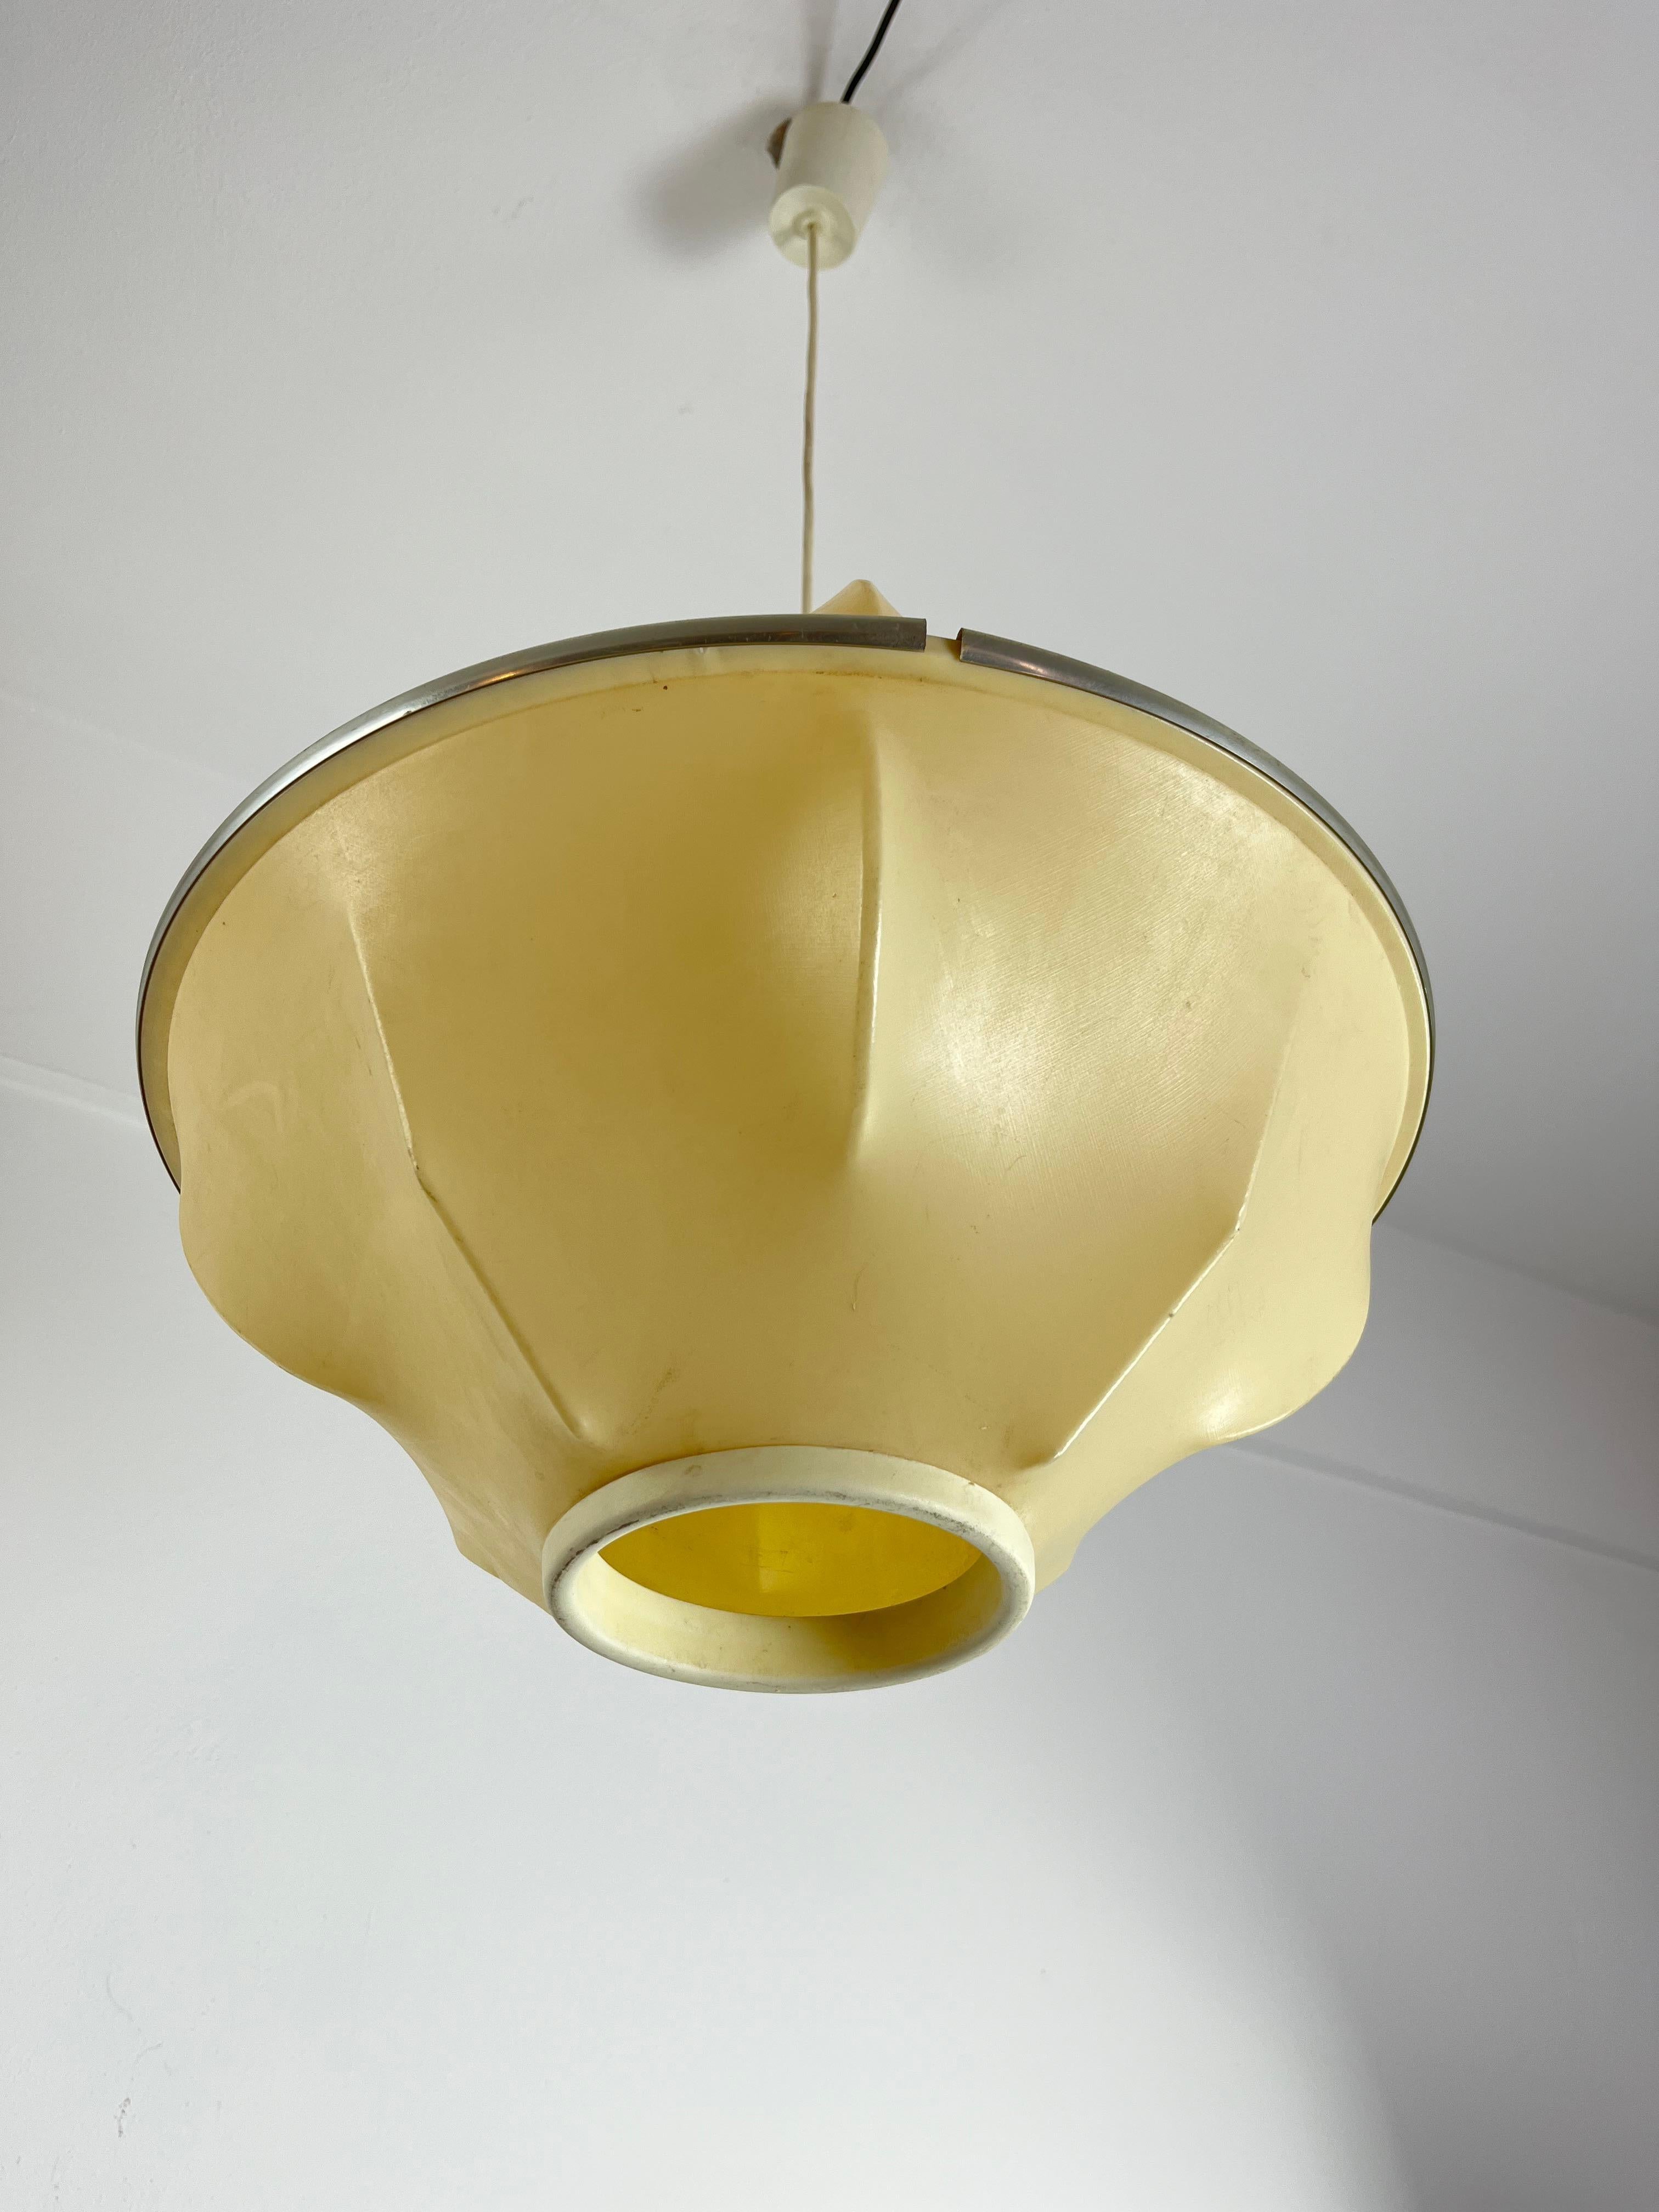 Mid-Century Modern Pendant Lamp Designed & Manufactered Probably By Flos 1960s For Sale 3